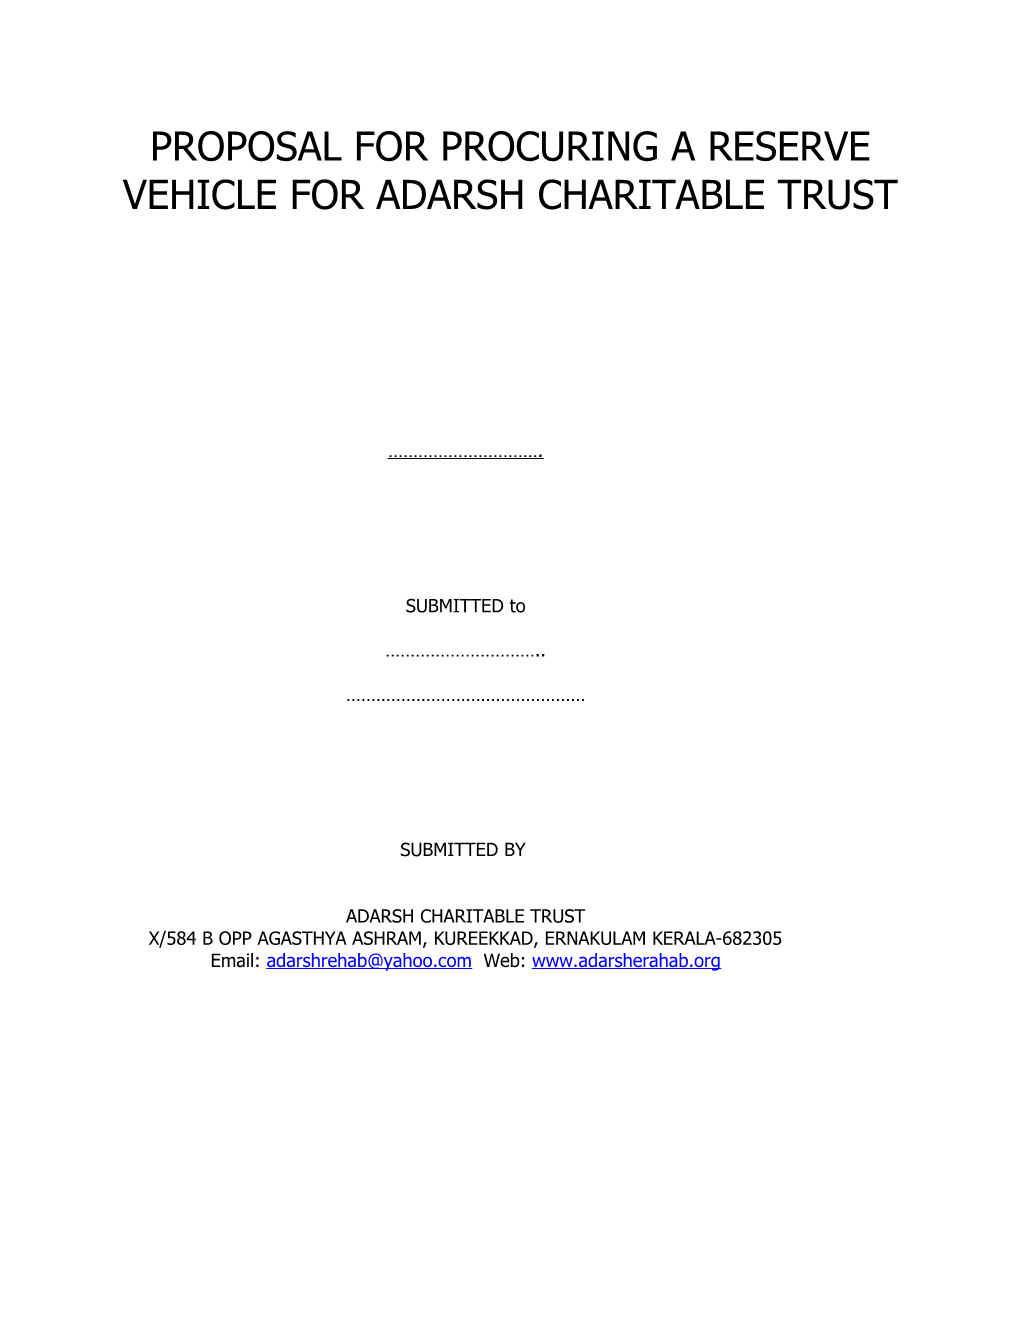 Proposal for Procuring a Reserve Vehicle for Adarsh Charitable Trust